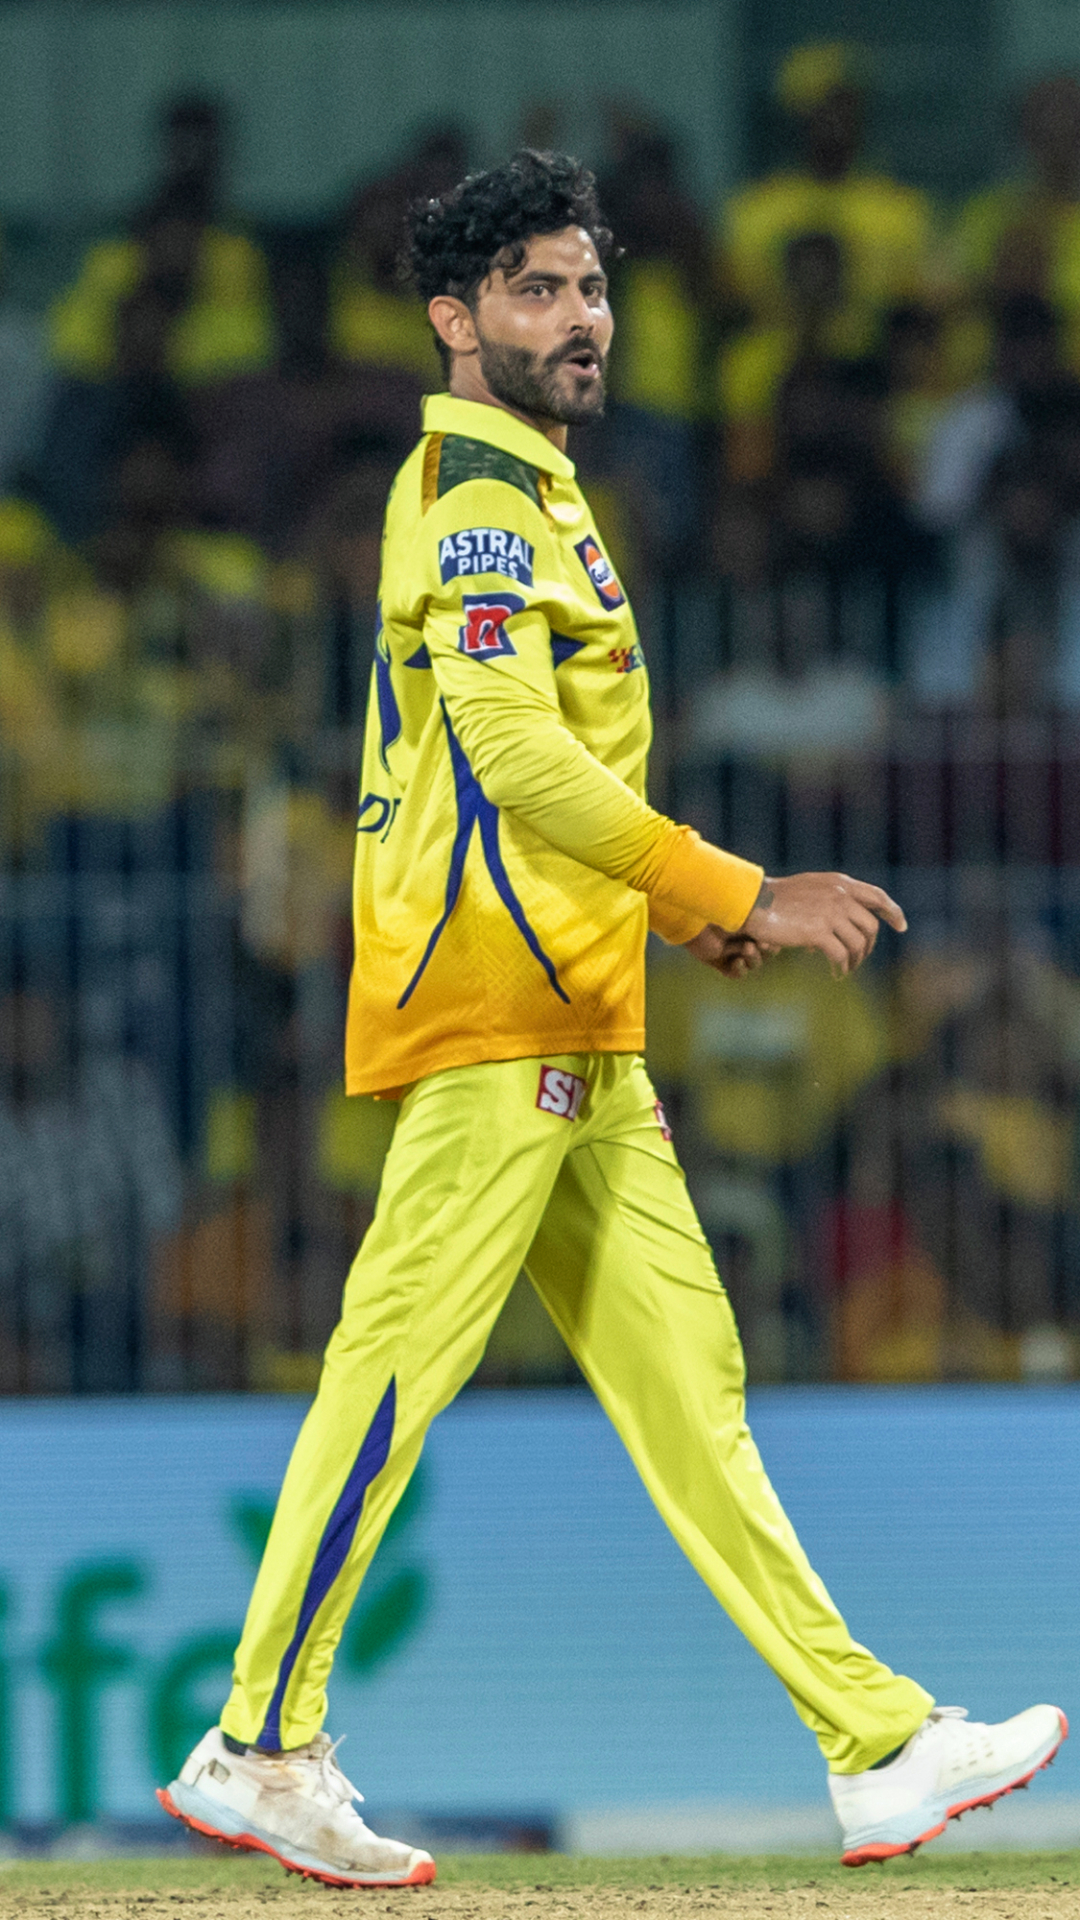 From Jadeja to Chawla, bowlers to concede most 6s in IPL history